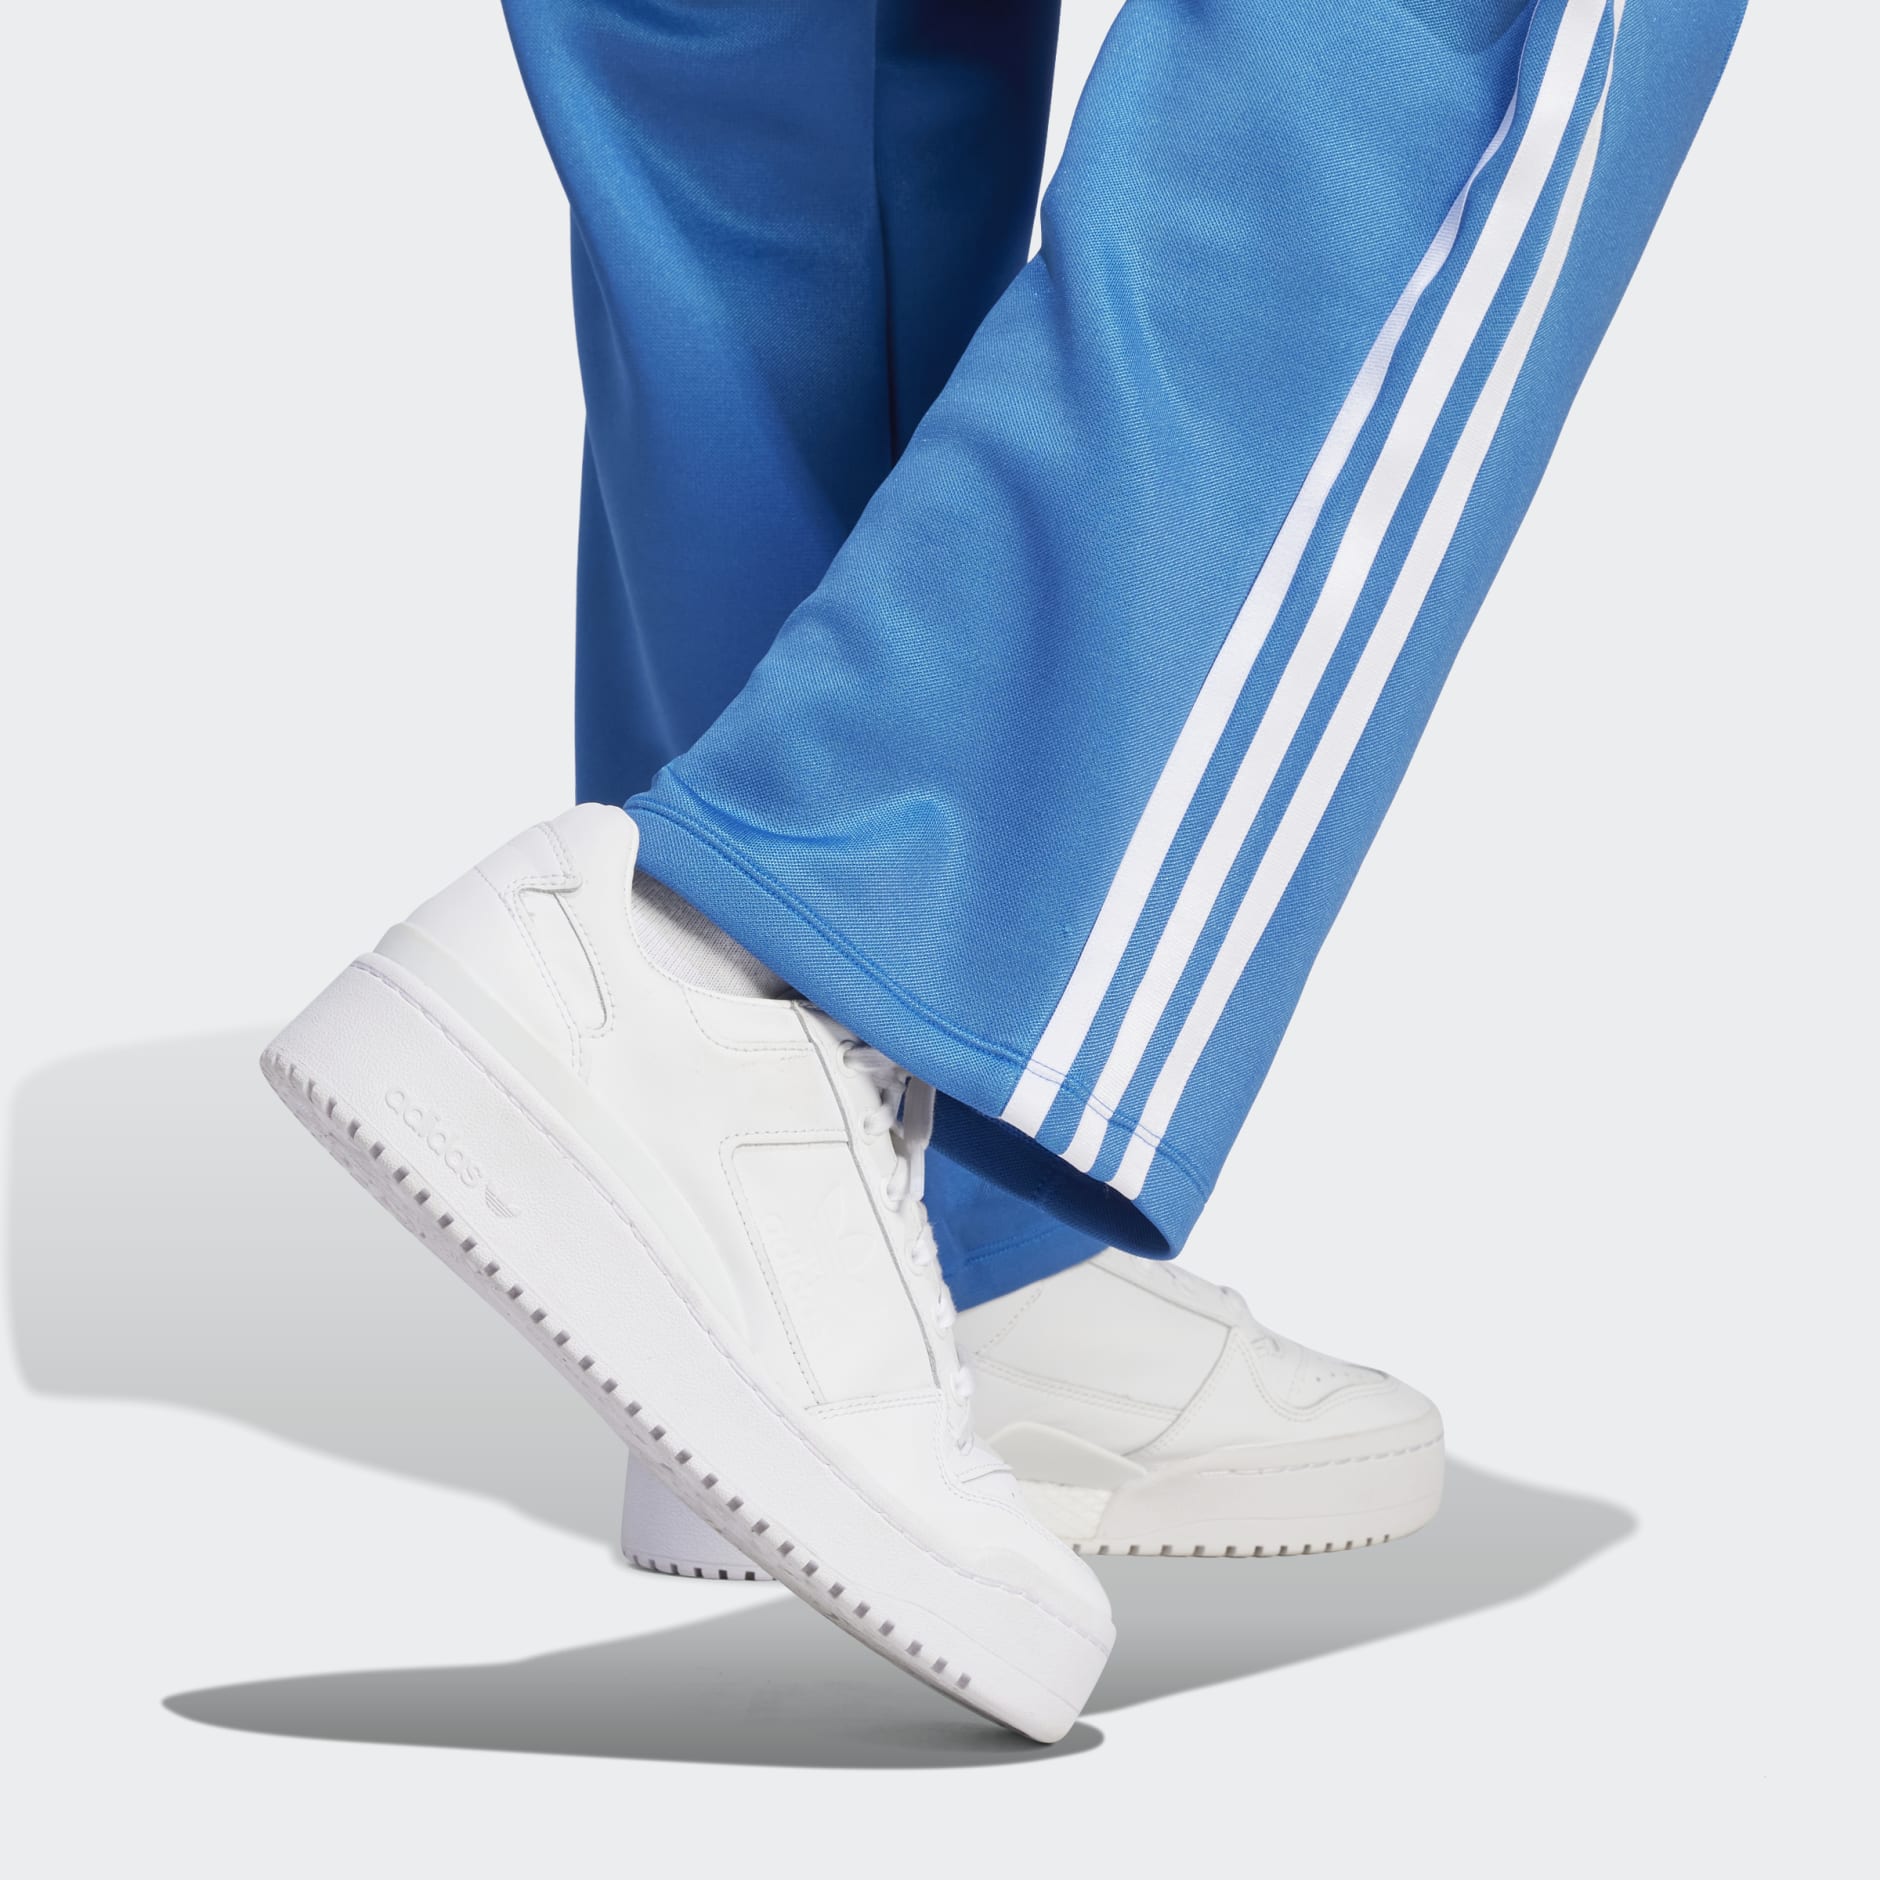 Adidas Baggy Fit Track Pants Size XL Unisex in Blue Colourway 